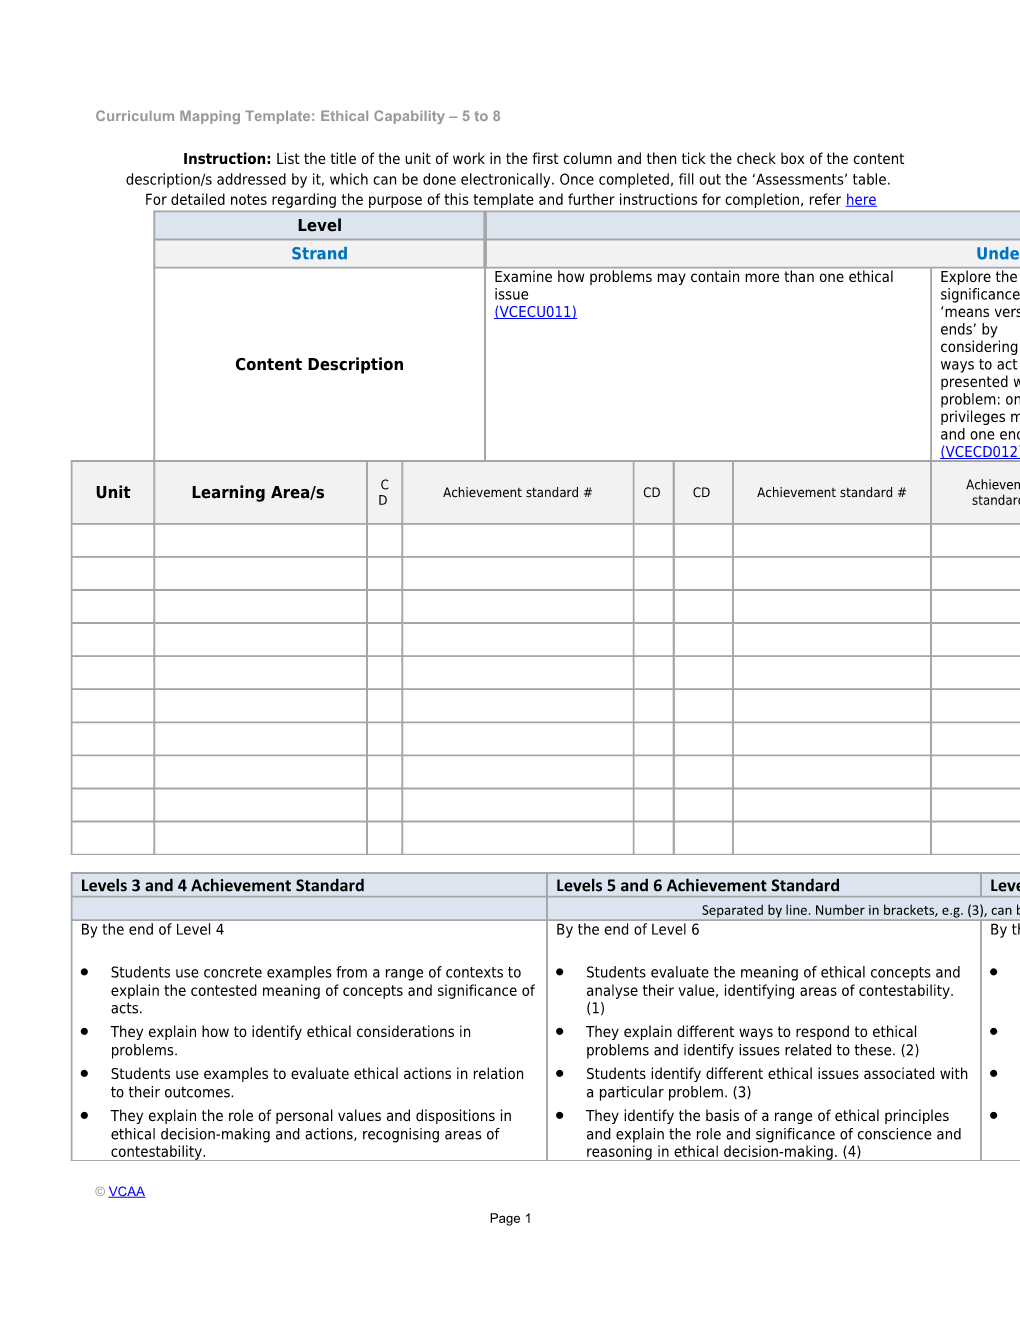 Curriculum Mapping Template: Ethical Capability 5 to 8